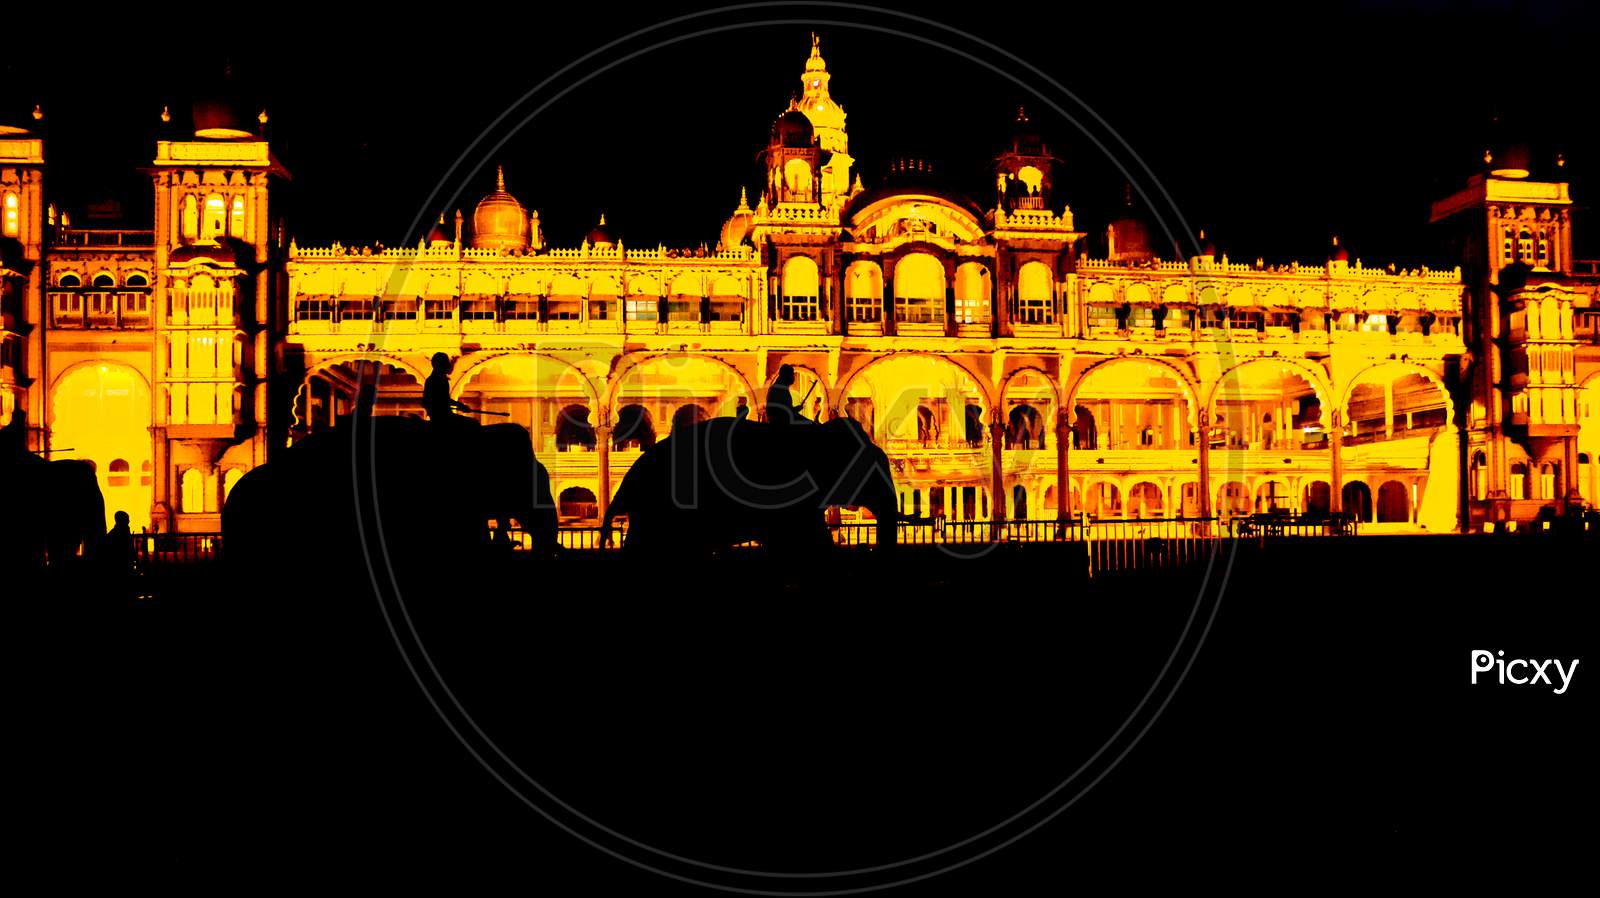 A Silhouette Picture of Royal Elephants walking in front of the Royal Ambavilas Palace during Dasara festival in Mysuru of Karnataka/India.